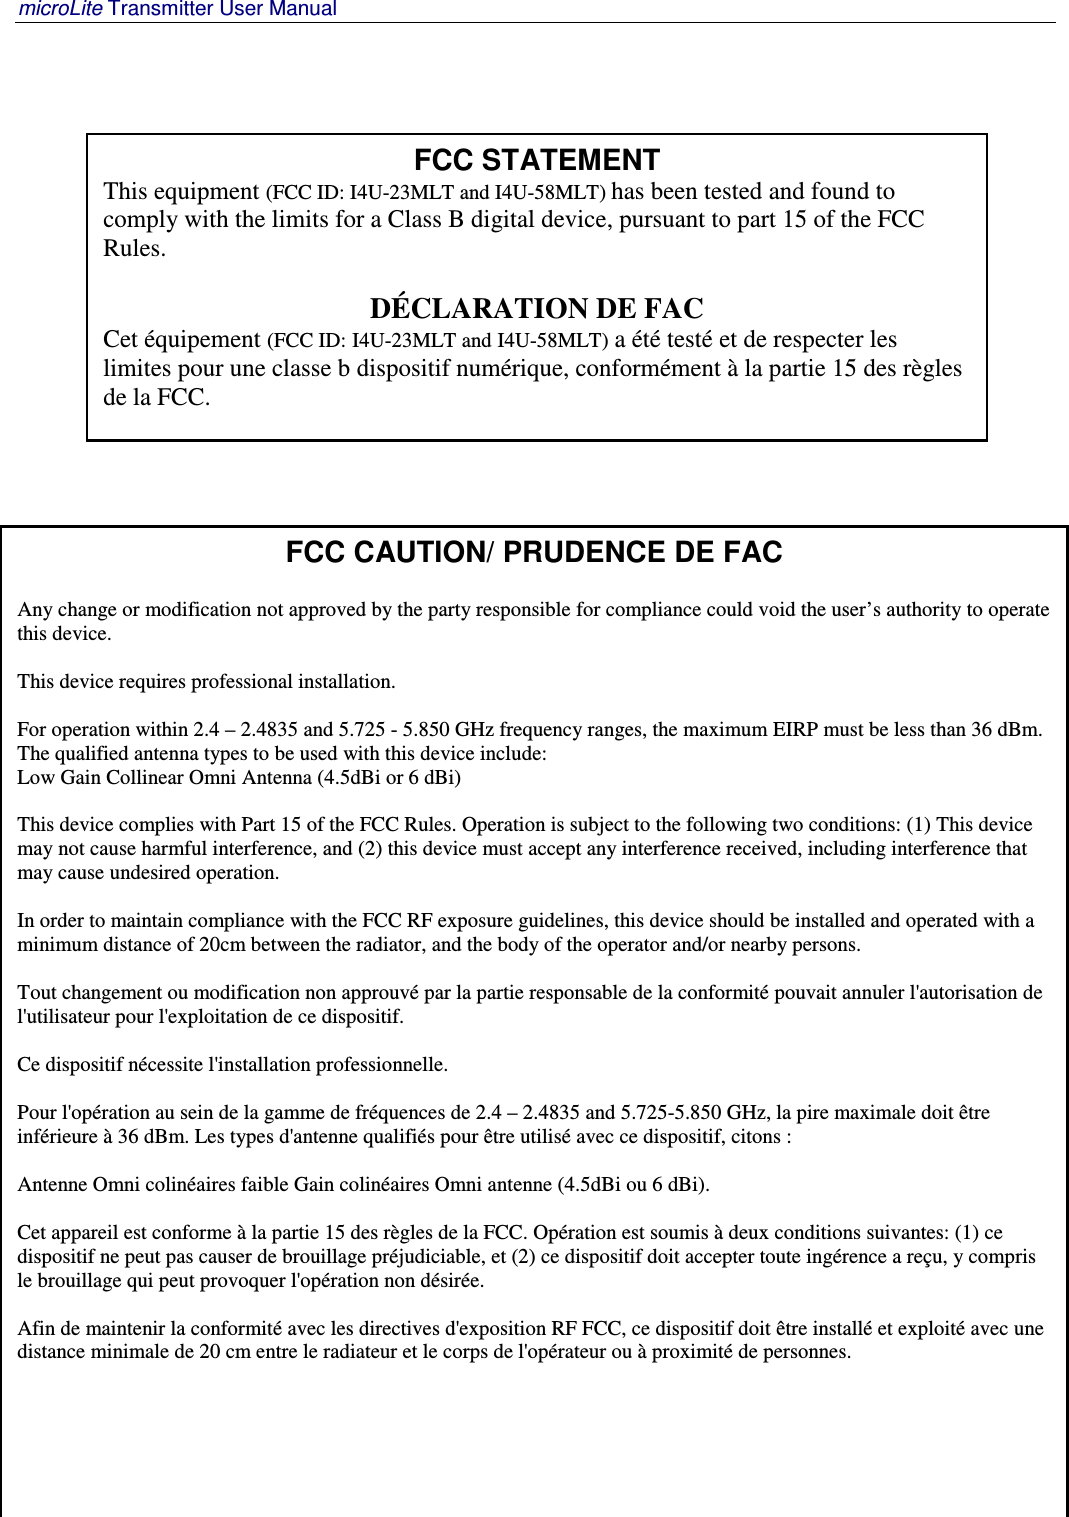 microLite Transmitter User Manual   Revision 1.2    4 FCC CAUTION/ PRUDENCE DE FAC  Any change or modification not approved by the party responsible for compliance could void the user’s authority to operate this device.  This device requires professional installation.   For operation within 2.4 – 2.4835 and 5.725 - 5.850 GHz frequency ranges, the maximum EIRP must be less than 36 dBm. The qualified antenna types to be used with this device include: Low Gain Collinear Omni Antenna (4.5dBi or 6 dBi)  This device complies with Part 15 of the FCC Rules. Operation is subject to the following two conditions: (1) This device may not cause harmful interference, and (2) this device must accept any interference received, including interference that may cause undesired operation.  In order to maintain compliance with the FCC RF exposure guidelines, this device should be installed and operated with a minimum distance of 20cm between the radiator, and the body of the operator and/or nearby persons.  Tout changement ou modification non approuvé par la partie responsable de la conformité pouvait annuler l&apos;autorisation de l&apos;utilisateur pour l&apos;exploitation de ce dispositif.  Ce dispositif nécessite l&apos;installation professionnelle.  Pour l&apos;opération au sein de la gamme de fréquences de 2.4 – 2.4835 and 5.725-5.850 GHz, la pire maximale doit être inférieure à 36 dBm. Les types d&apos;antenne qualifiés pour être utilisé avec ce dispositif, citons :  Antenne Omni colinéaires faible Gain colinéaires Omni antenne (4.5dBi ou 6 dBi).  Cet appareil est conforme à la partie 15 des règles de la FCC. Opération est soumis à deux conditions suivantes: (1) ce dispositif ne peut pas causer de brouillage préjudiciable, et (2) ce dispositif doit accepter toute ingérence a reçu, y compris le brouillage qui peut provoquer l&apos;opération non désirée.  Afin de maintenir la conformité avec les directives d&apos;exposition RF FCC, ce dispositif doit être installé et exploité avec une distance minimale de 20 cm entre le radiateur et le corps de l&apos;opérateur ou à proximité de personnes.       FCC STATEMENT This equipment (FCC ID: I4U-23MLT and I4U-58MLT) has been tested and found to comply with the limits for a Class B digital device, pursuant to part 15 of the FCC Rules.  DÉCLARATION DE FAC Cet équipement (FCC ID: I4U-23MLT and I4U-58MLT) a été testé et de respecter les limites pour une classe b dispositif numérique, conformément à la partie 15 des règles de la FCC.    